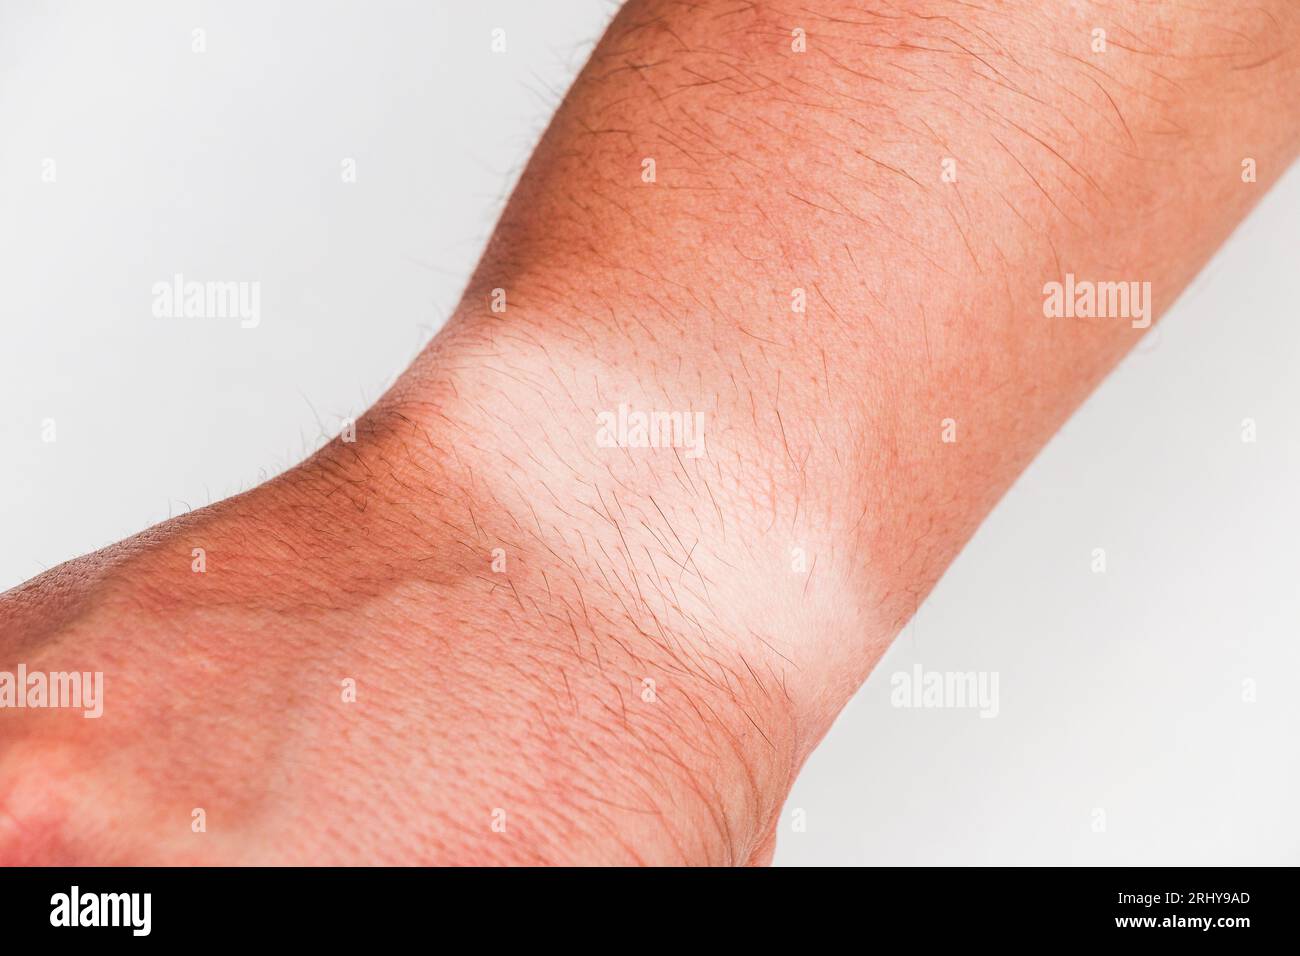 Close-up of the wrist of an unrecognizable human arm with a tanned watch mark or having sunbathed during the summer over white background. Stock Photo